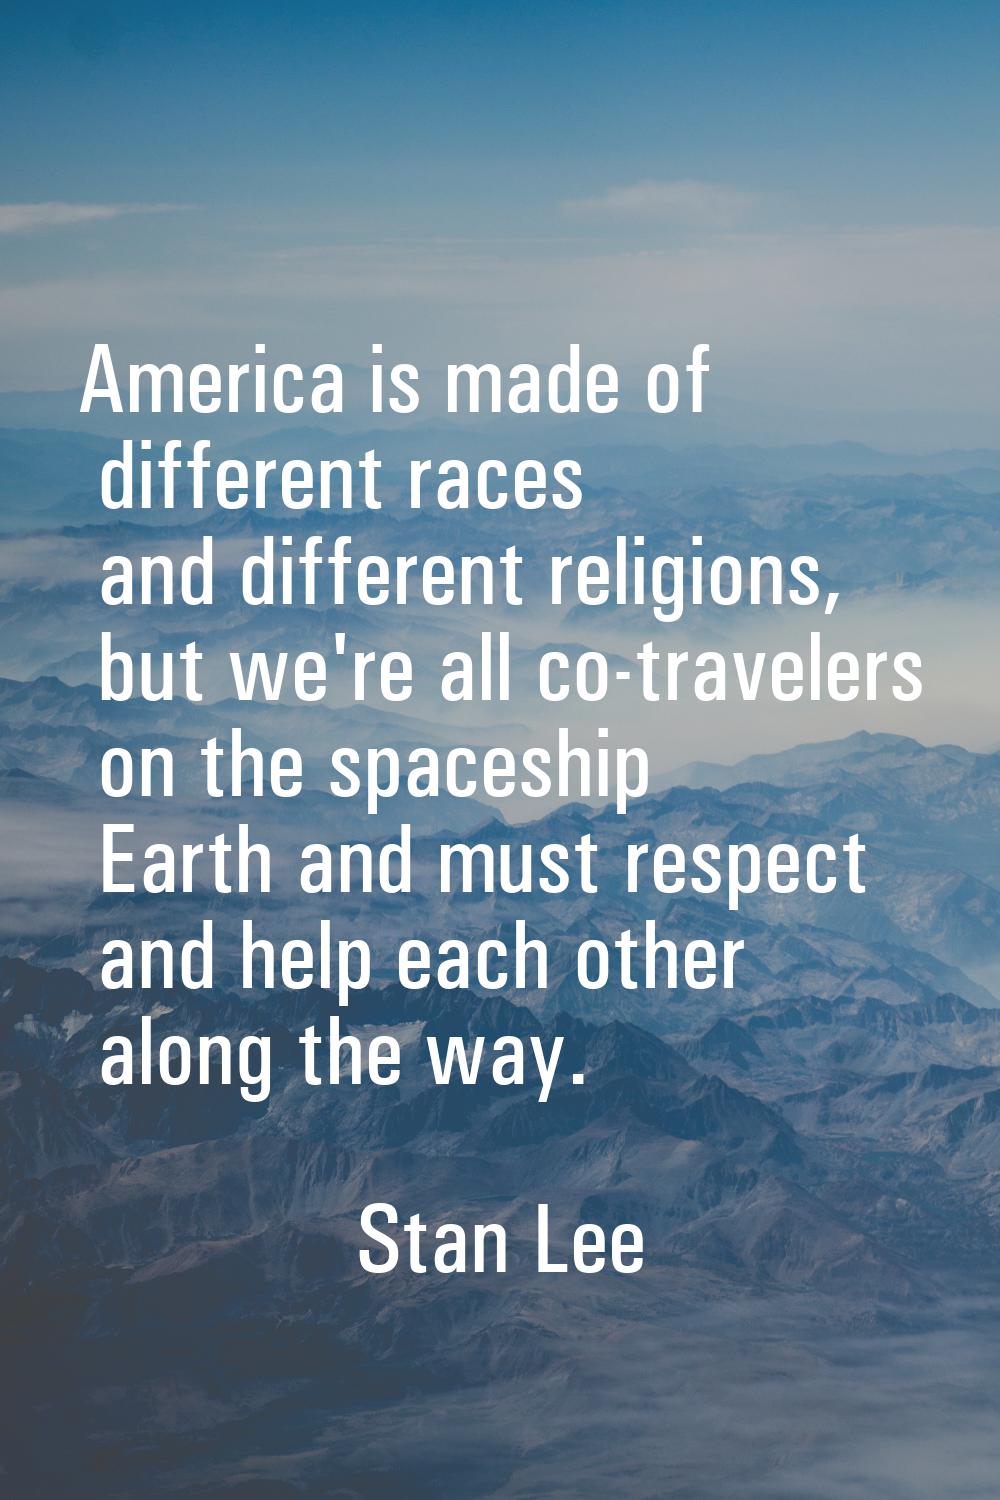 America is made of different races and different religions, but we're all co-travelers on the space